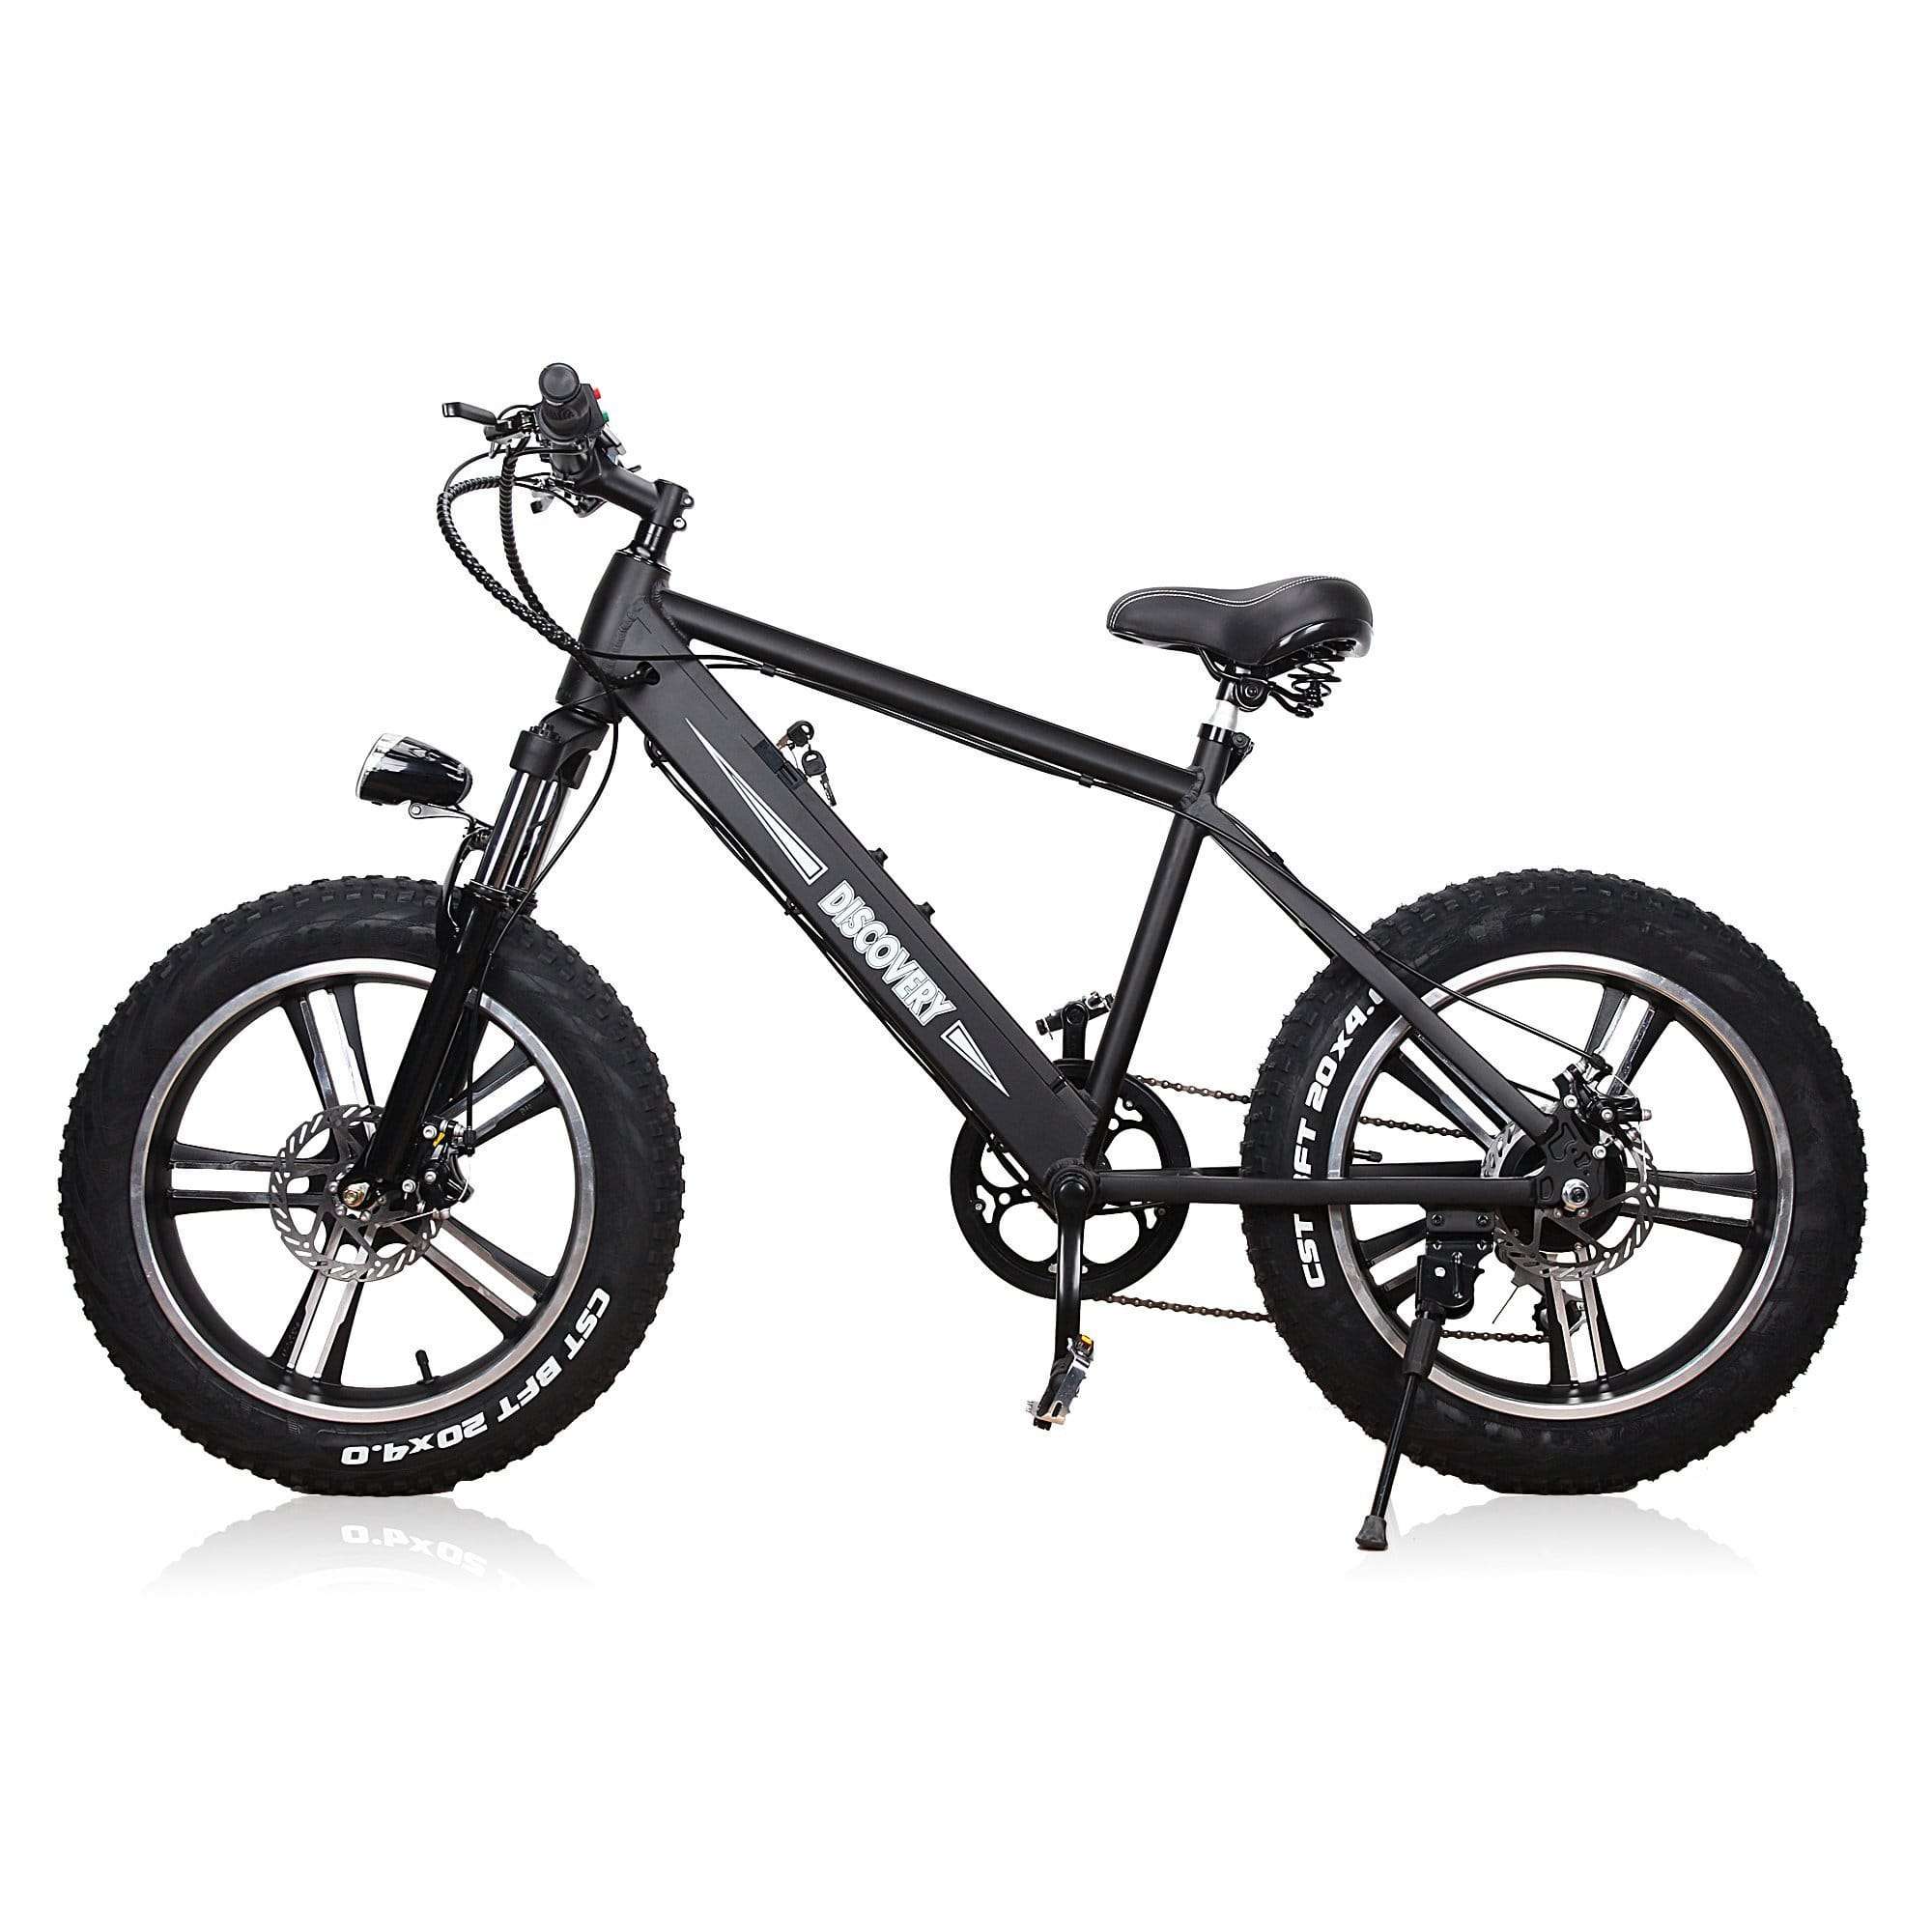 Nakto, NAKTO 20 inch 300W Motor with Peak 600W 20 MPH Discovery Fat Tire Electric Bicycle 6 Speed E-Bike 48V Lithium Battery New